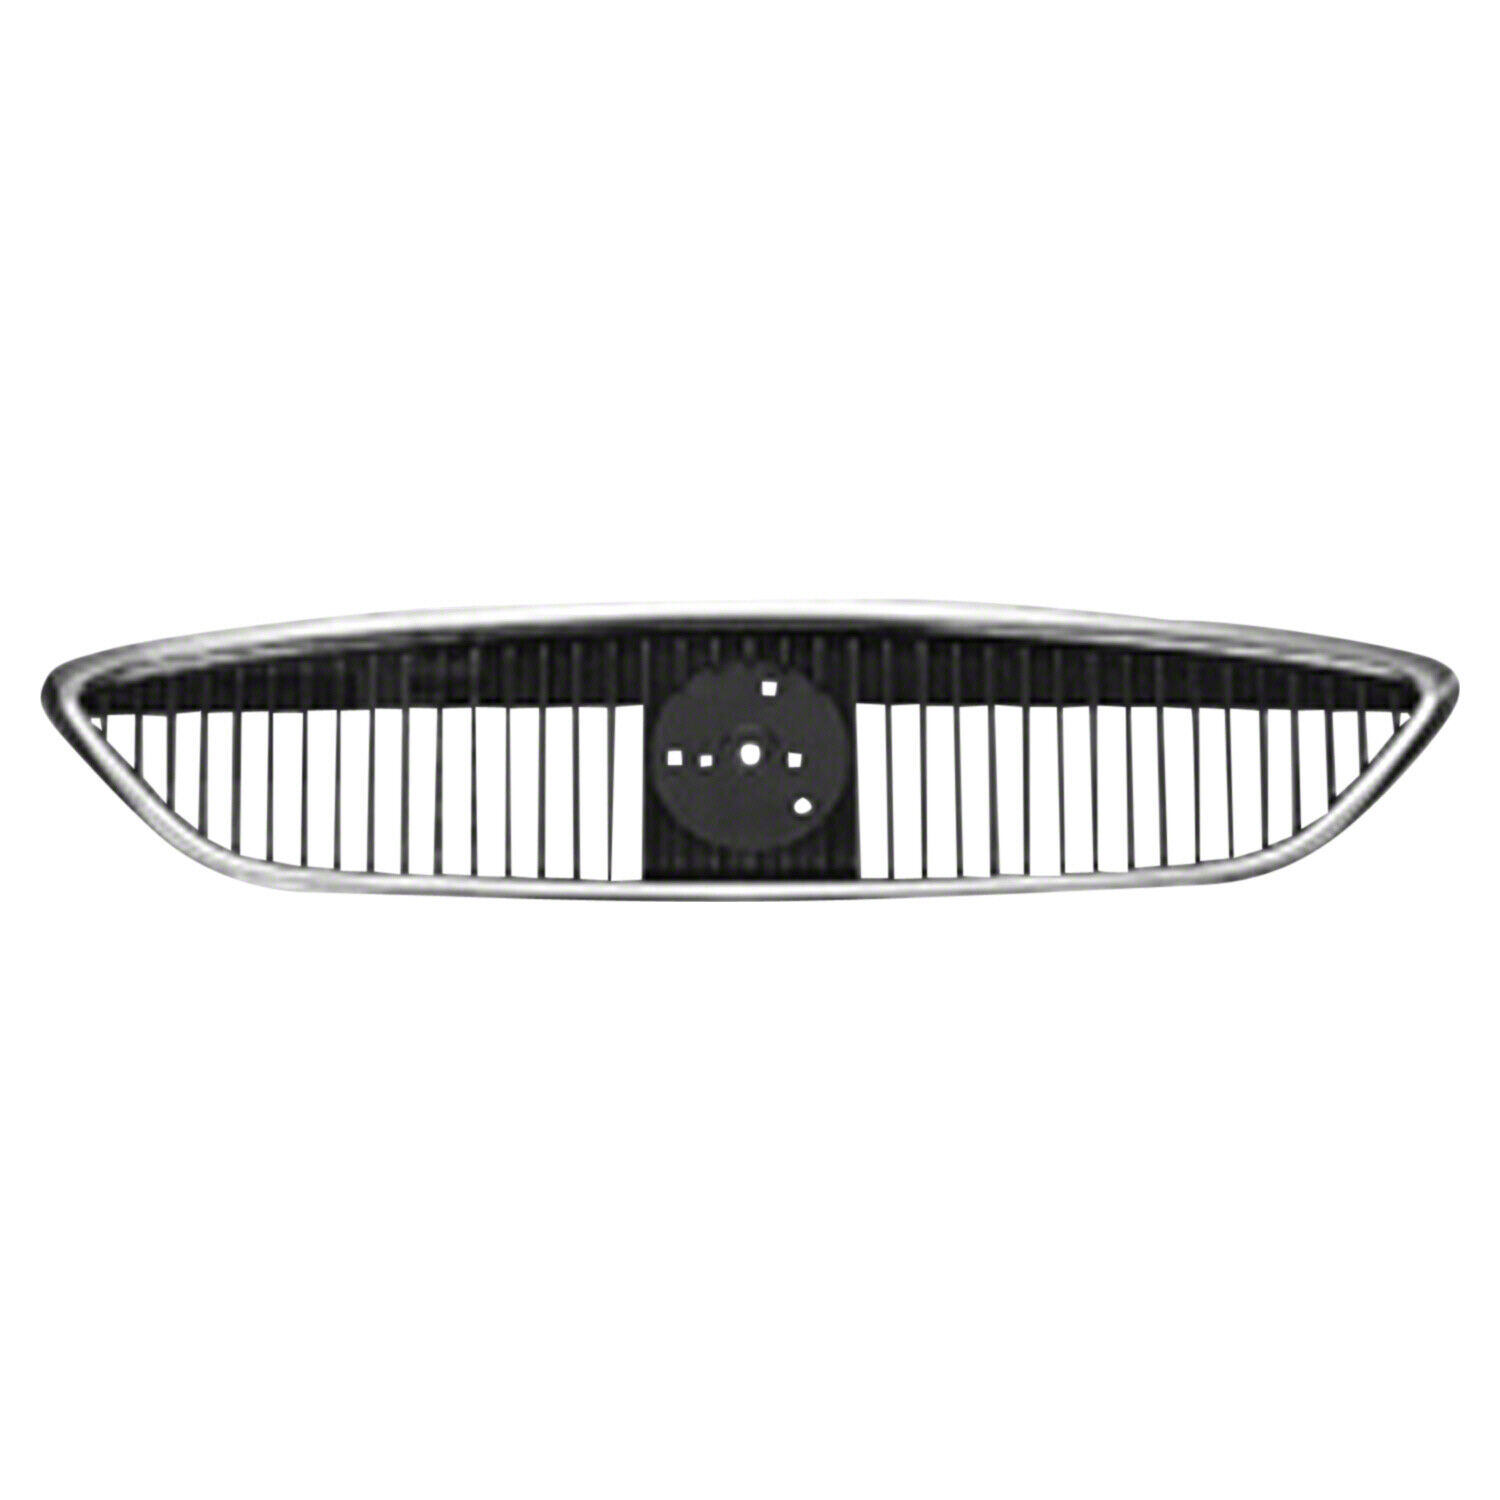 FO1200372 New Grille Fits 2000-2003 Mercury Sable